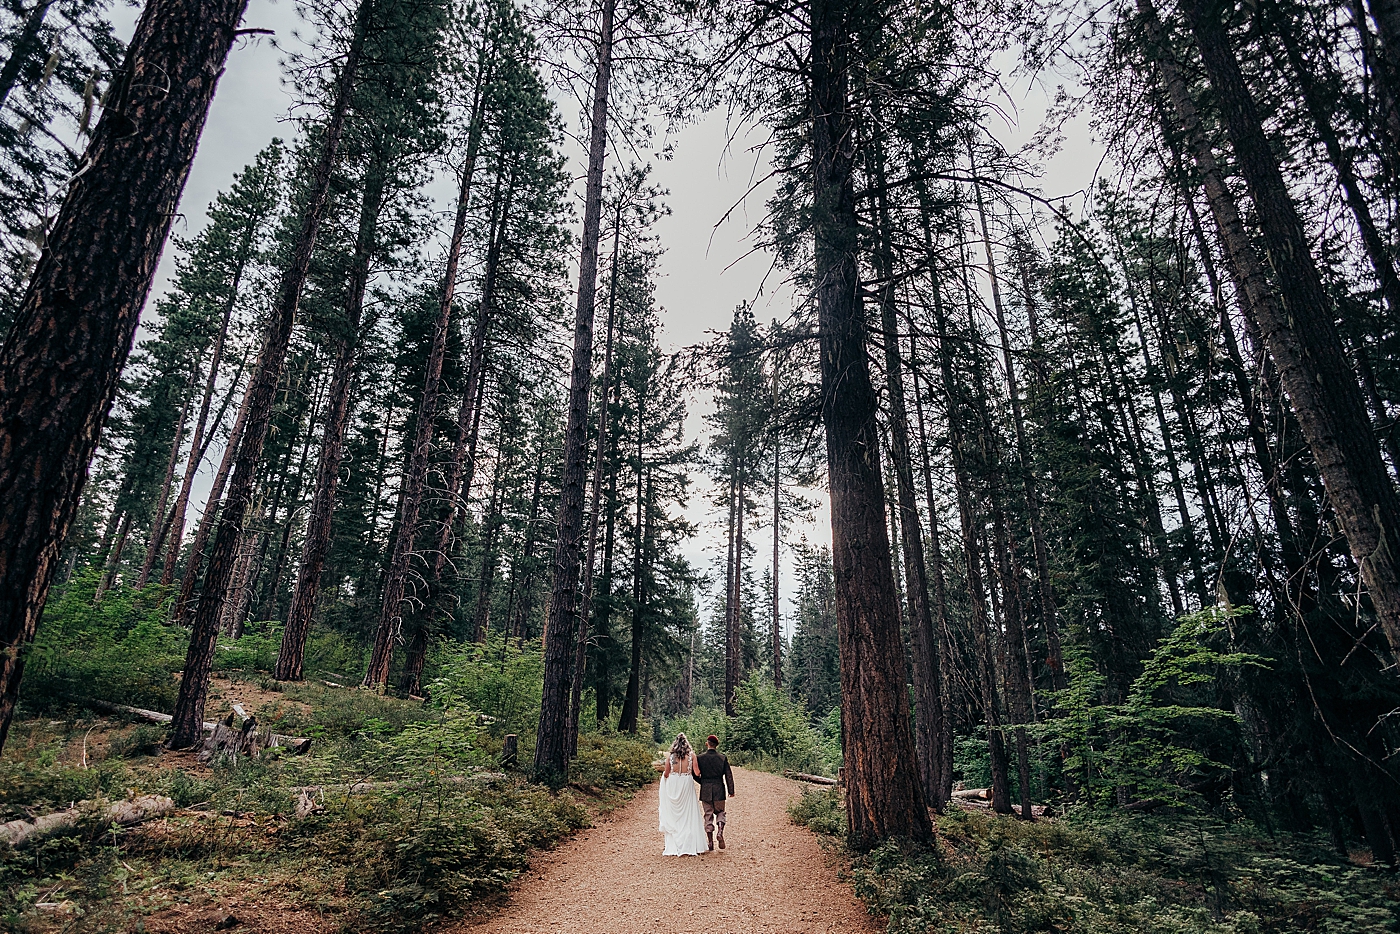 Bride and groom in forest in Leavenworth. Photo by Megan Montalvo Photography.